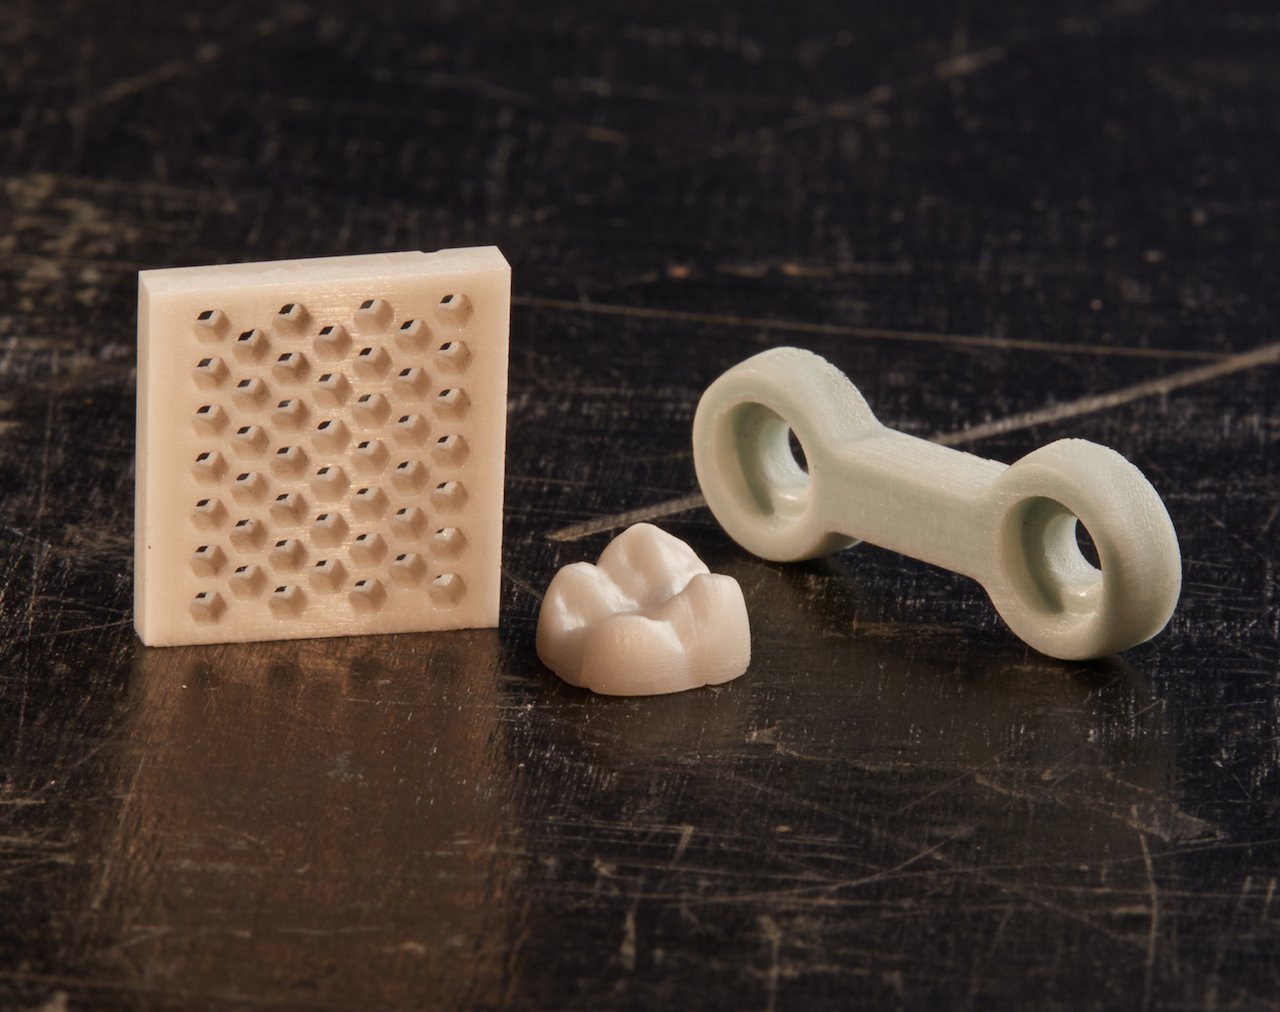  3D printed ceramic samples produced by Xjet 